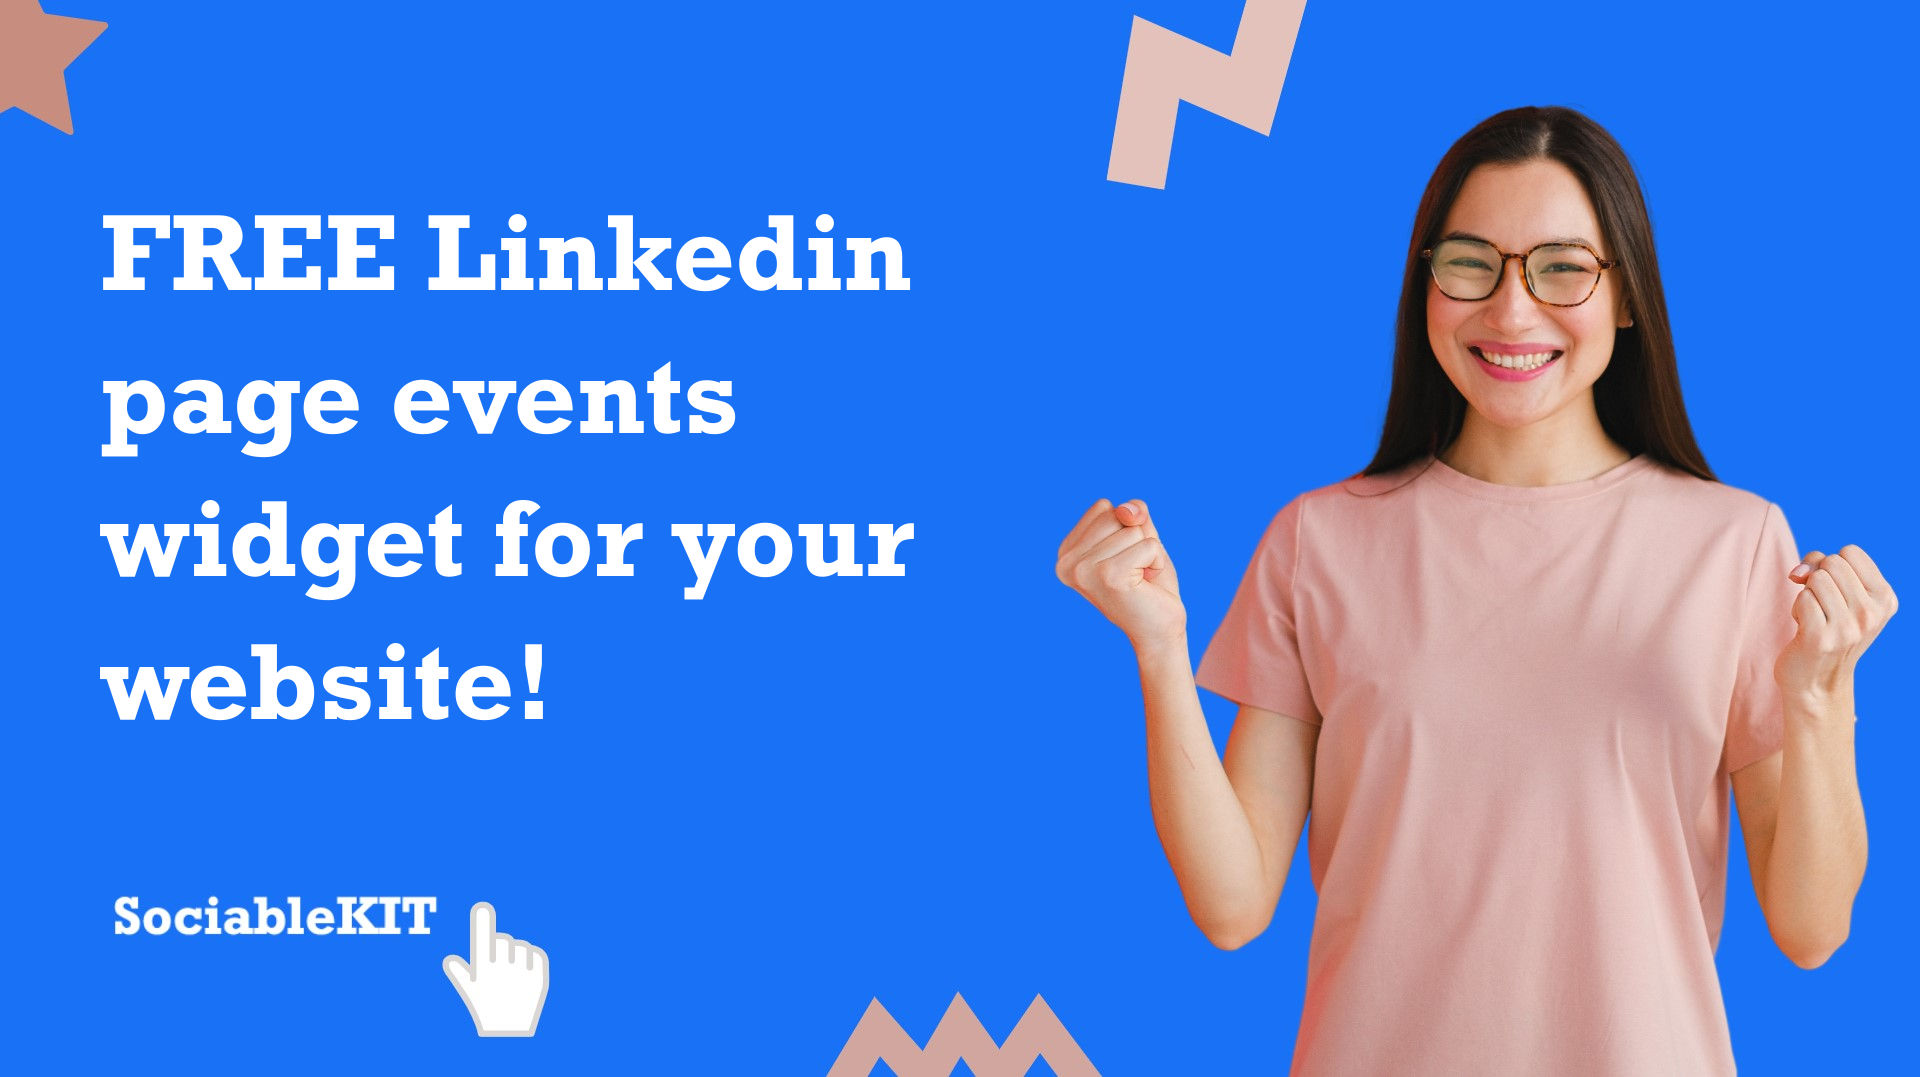 Free Linkedin page events widget for your website